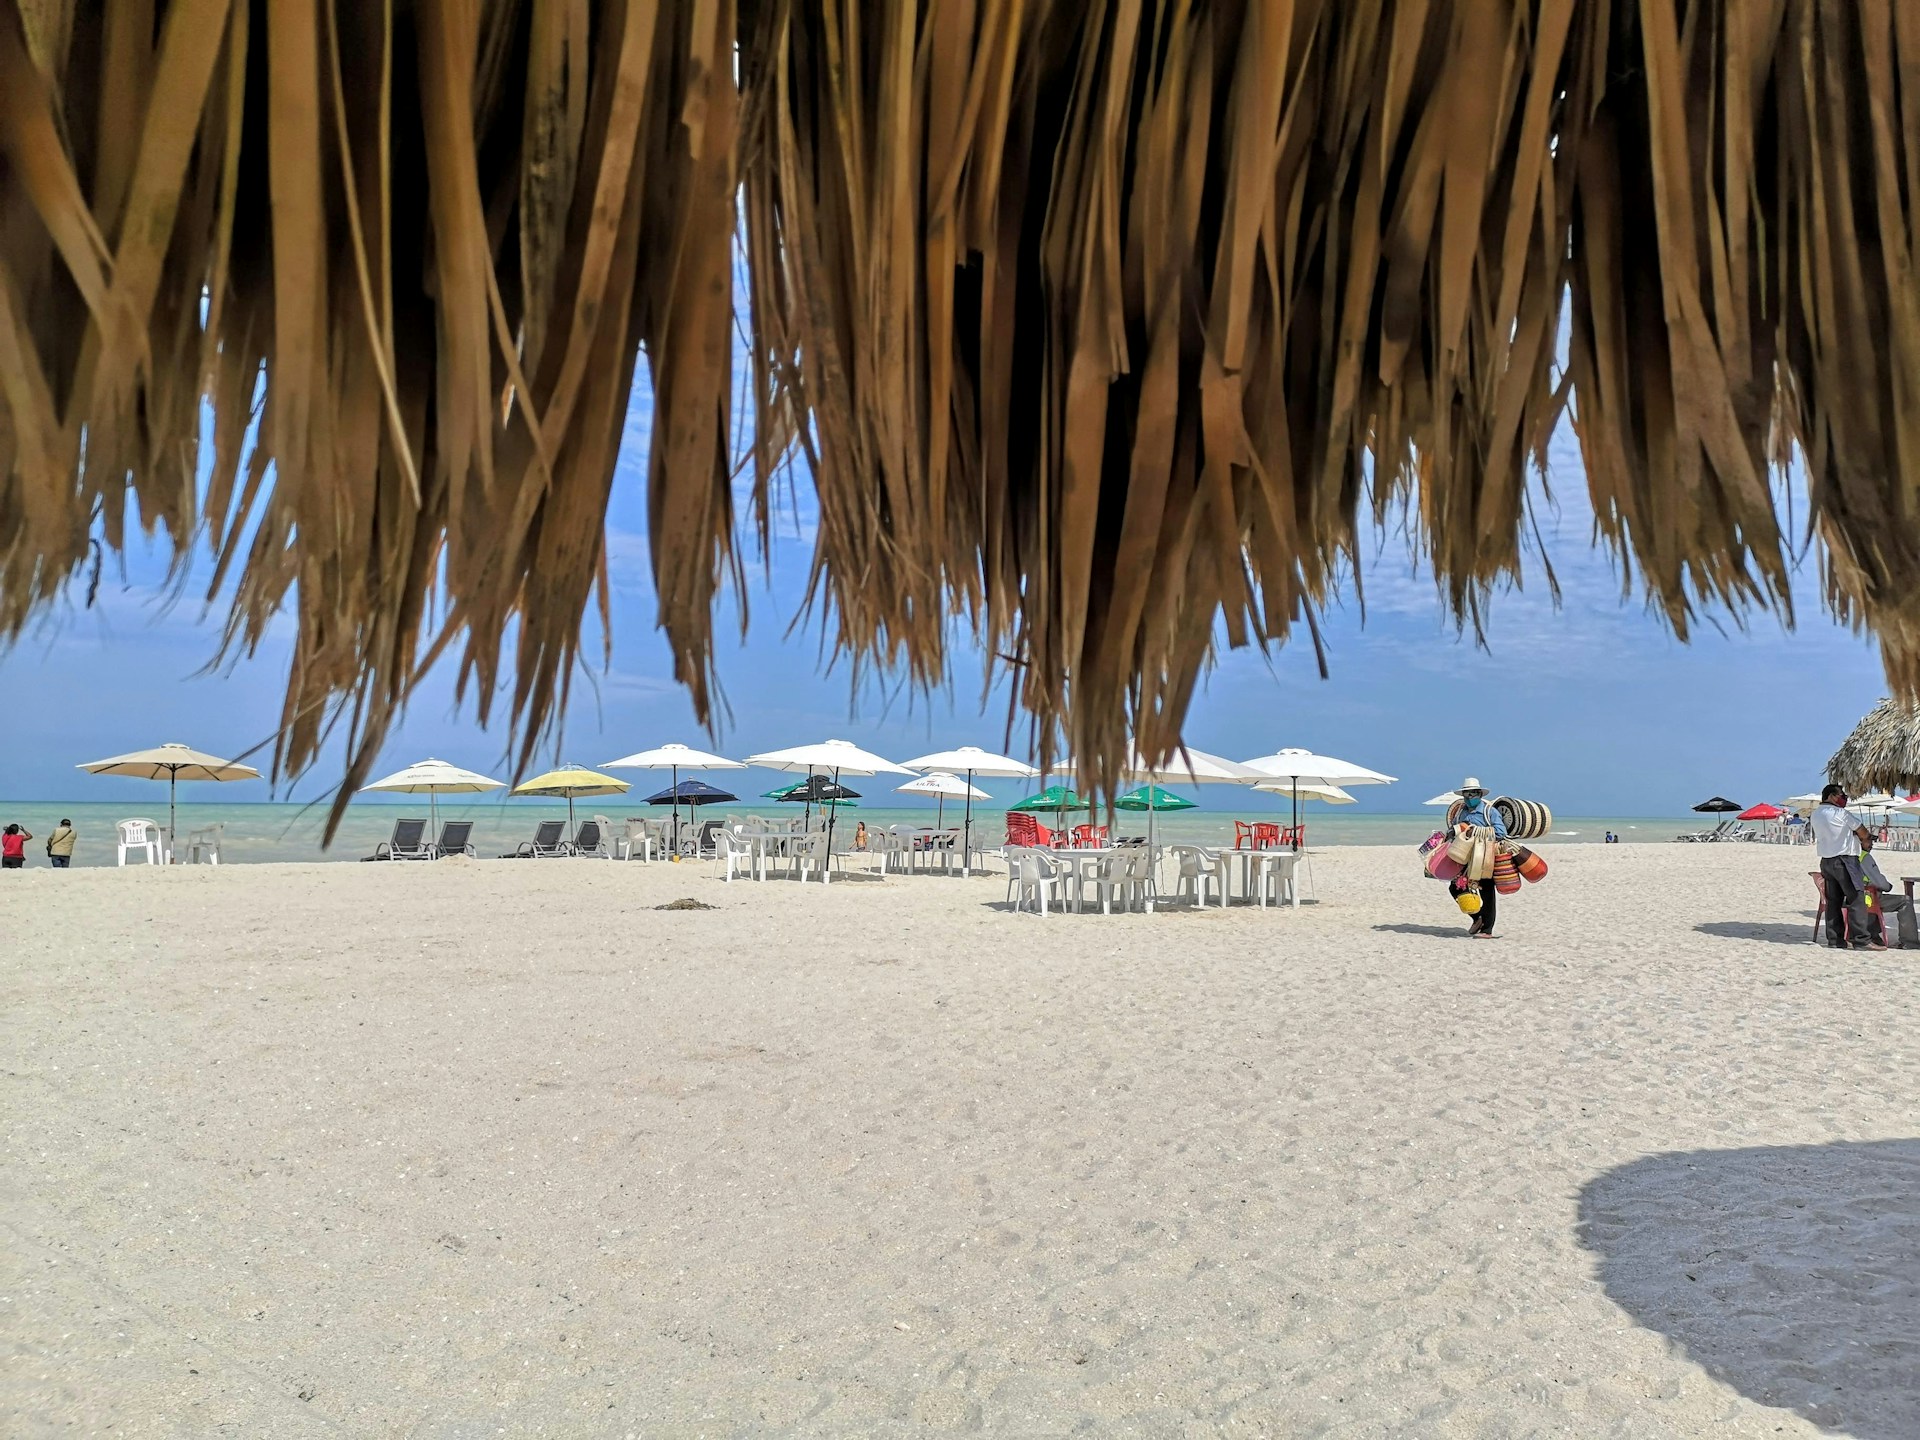 View of the beach from under a tiki hut with umbrellas and chairs facing the ocean in Progreso, Mexico
